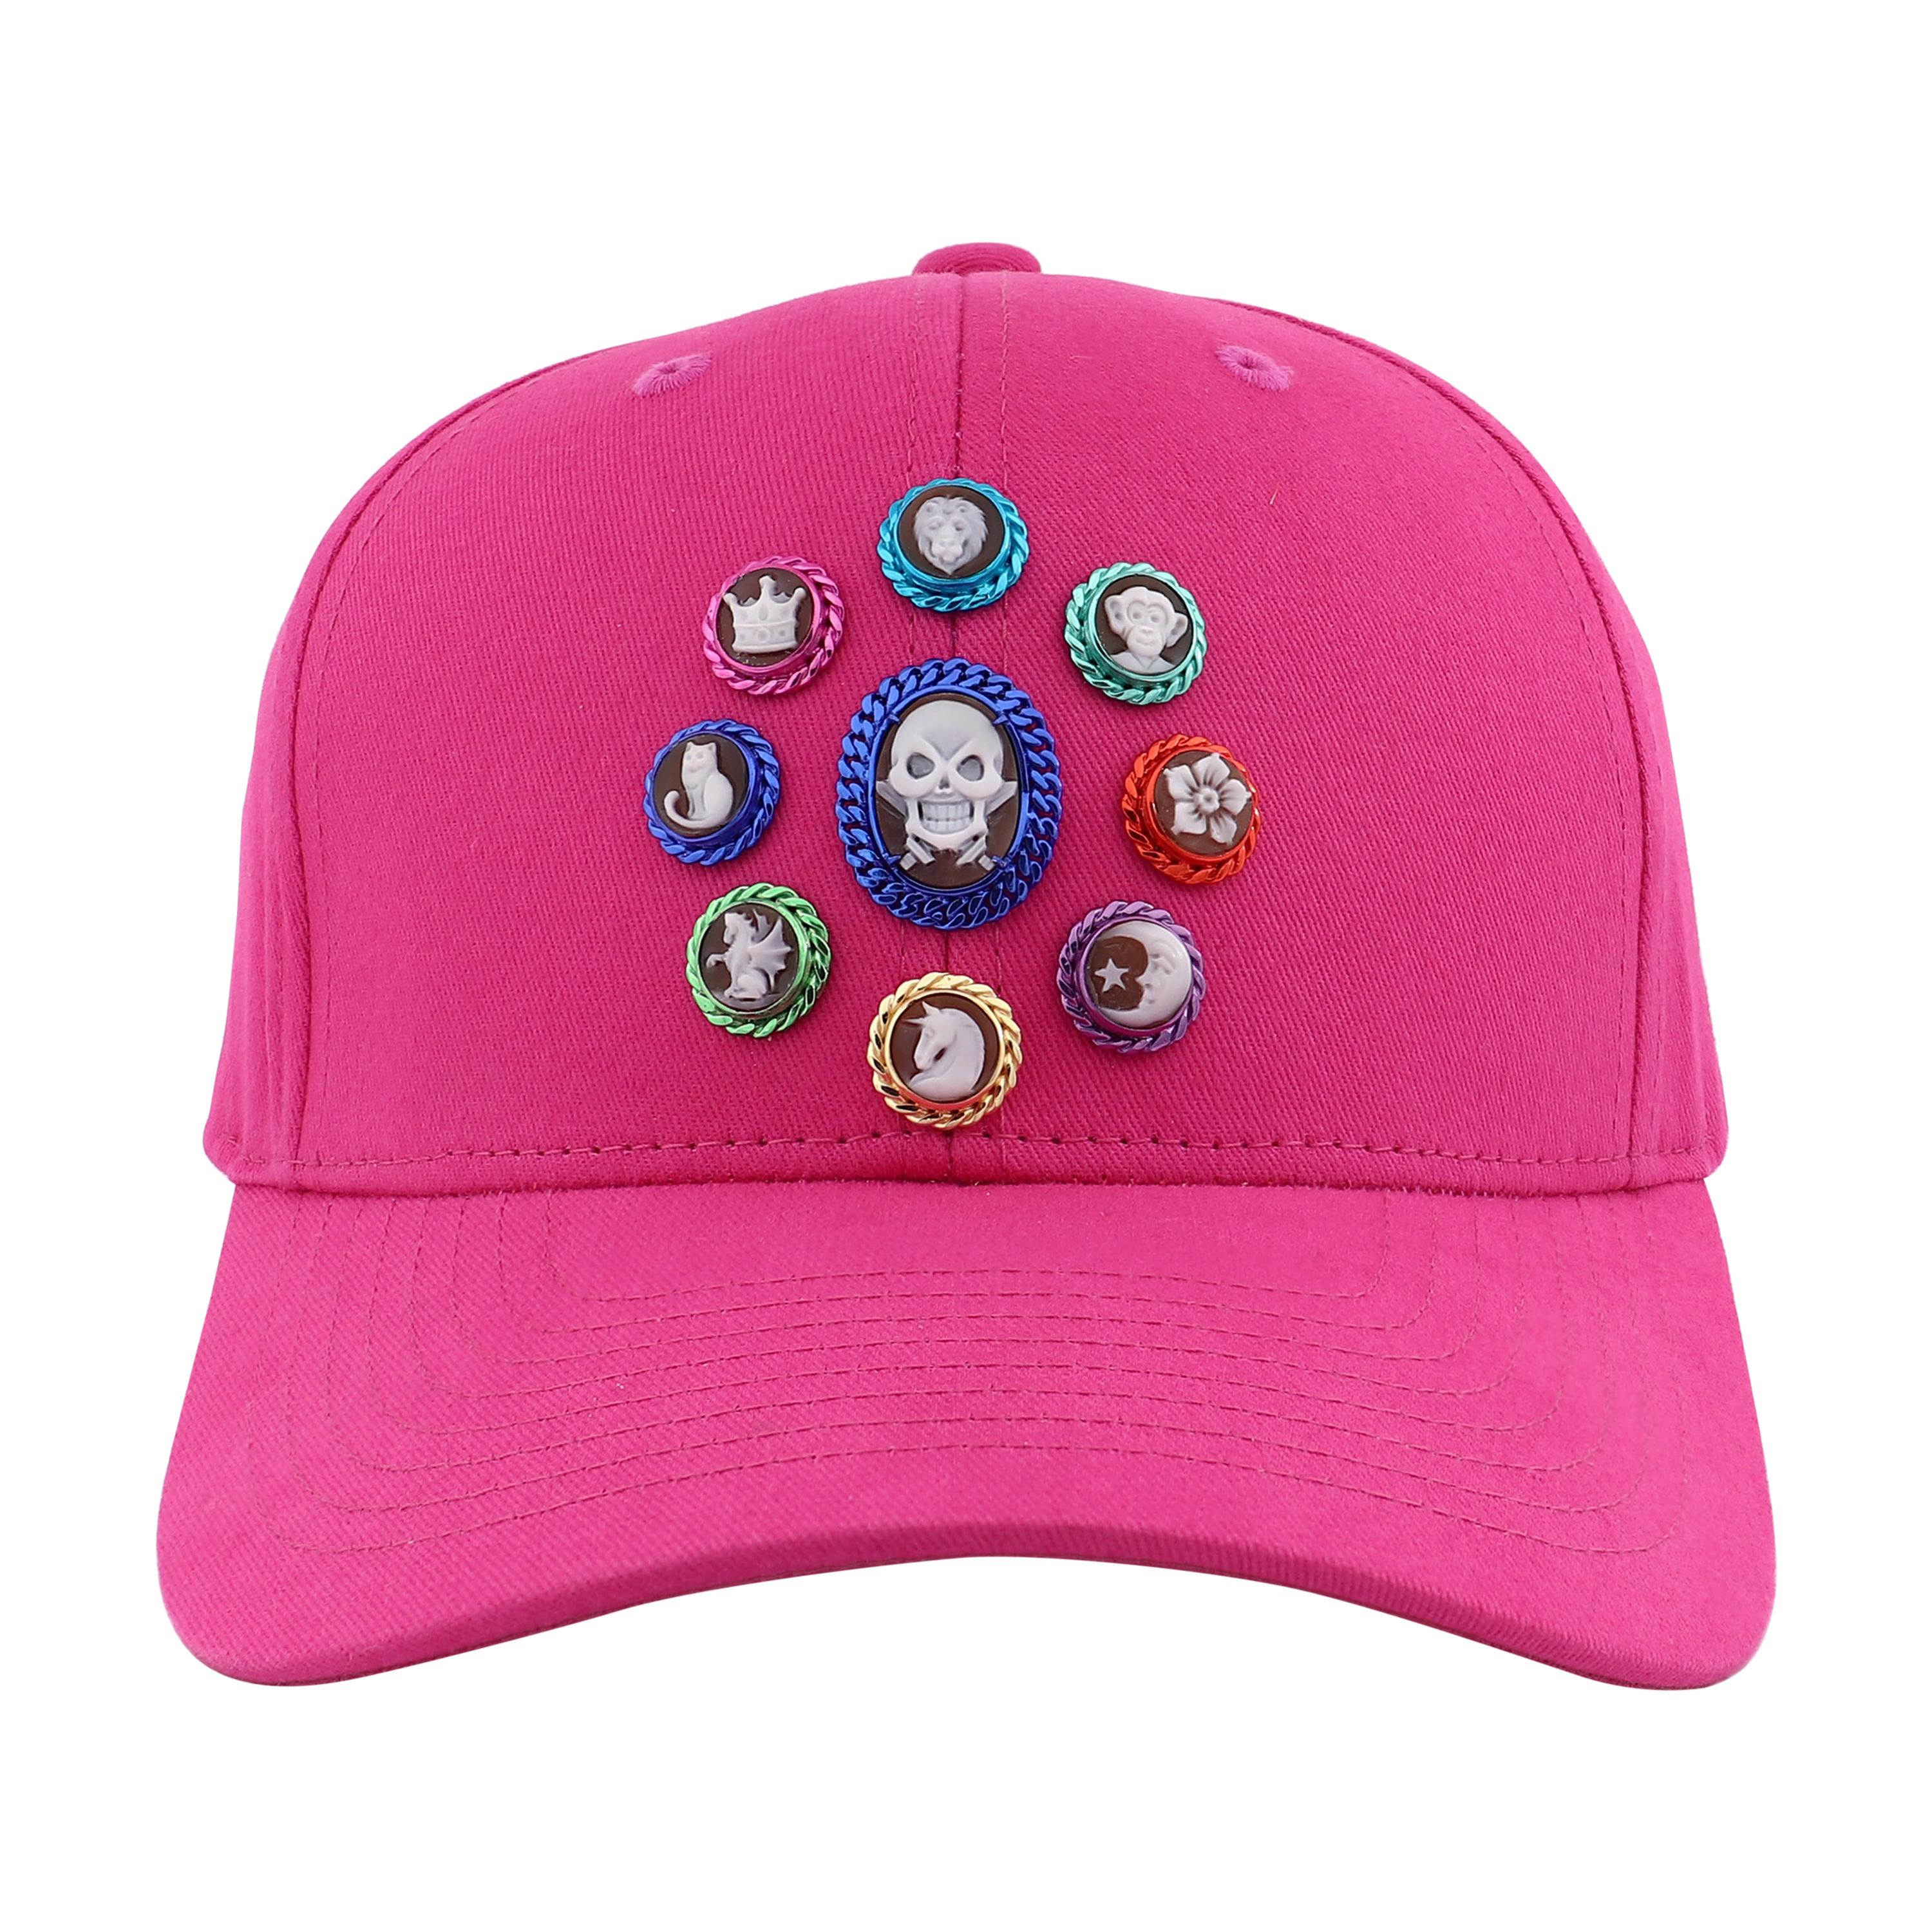 Amedeo "Modern Tiaras" Pink Cameo Cap For Sale